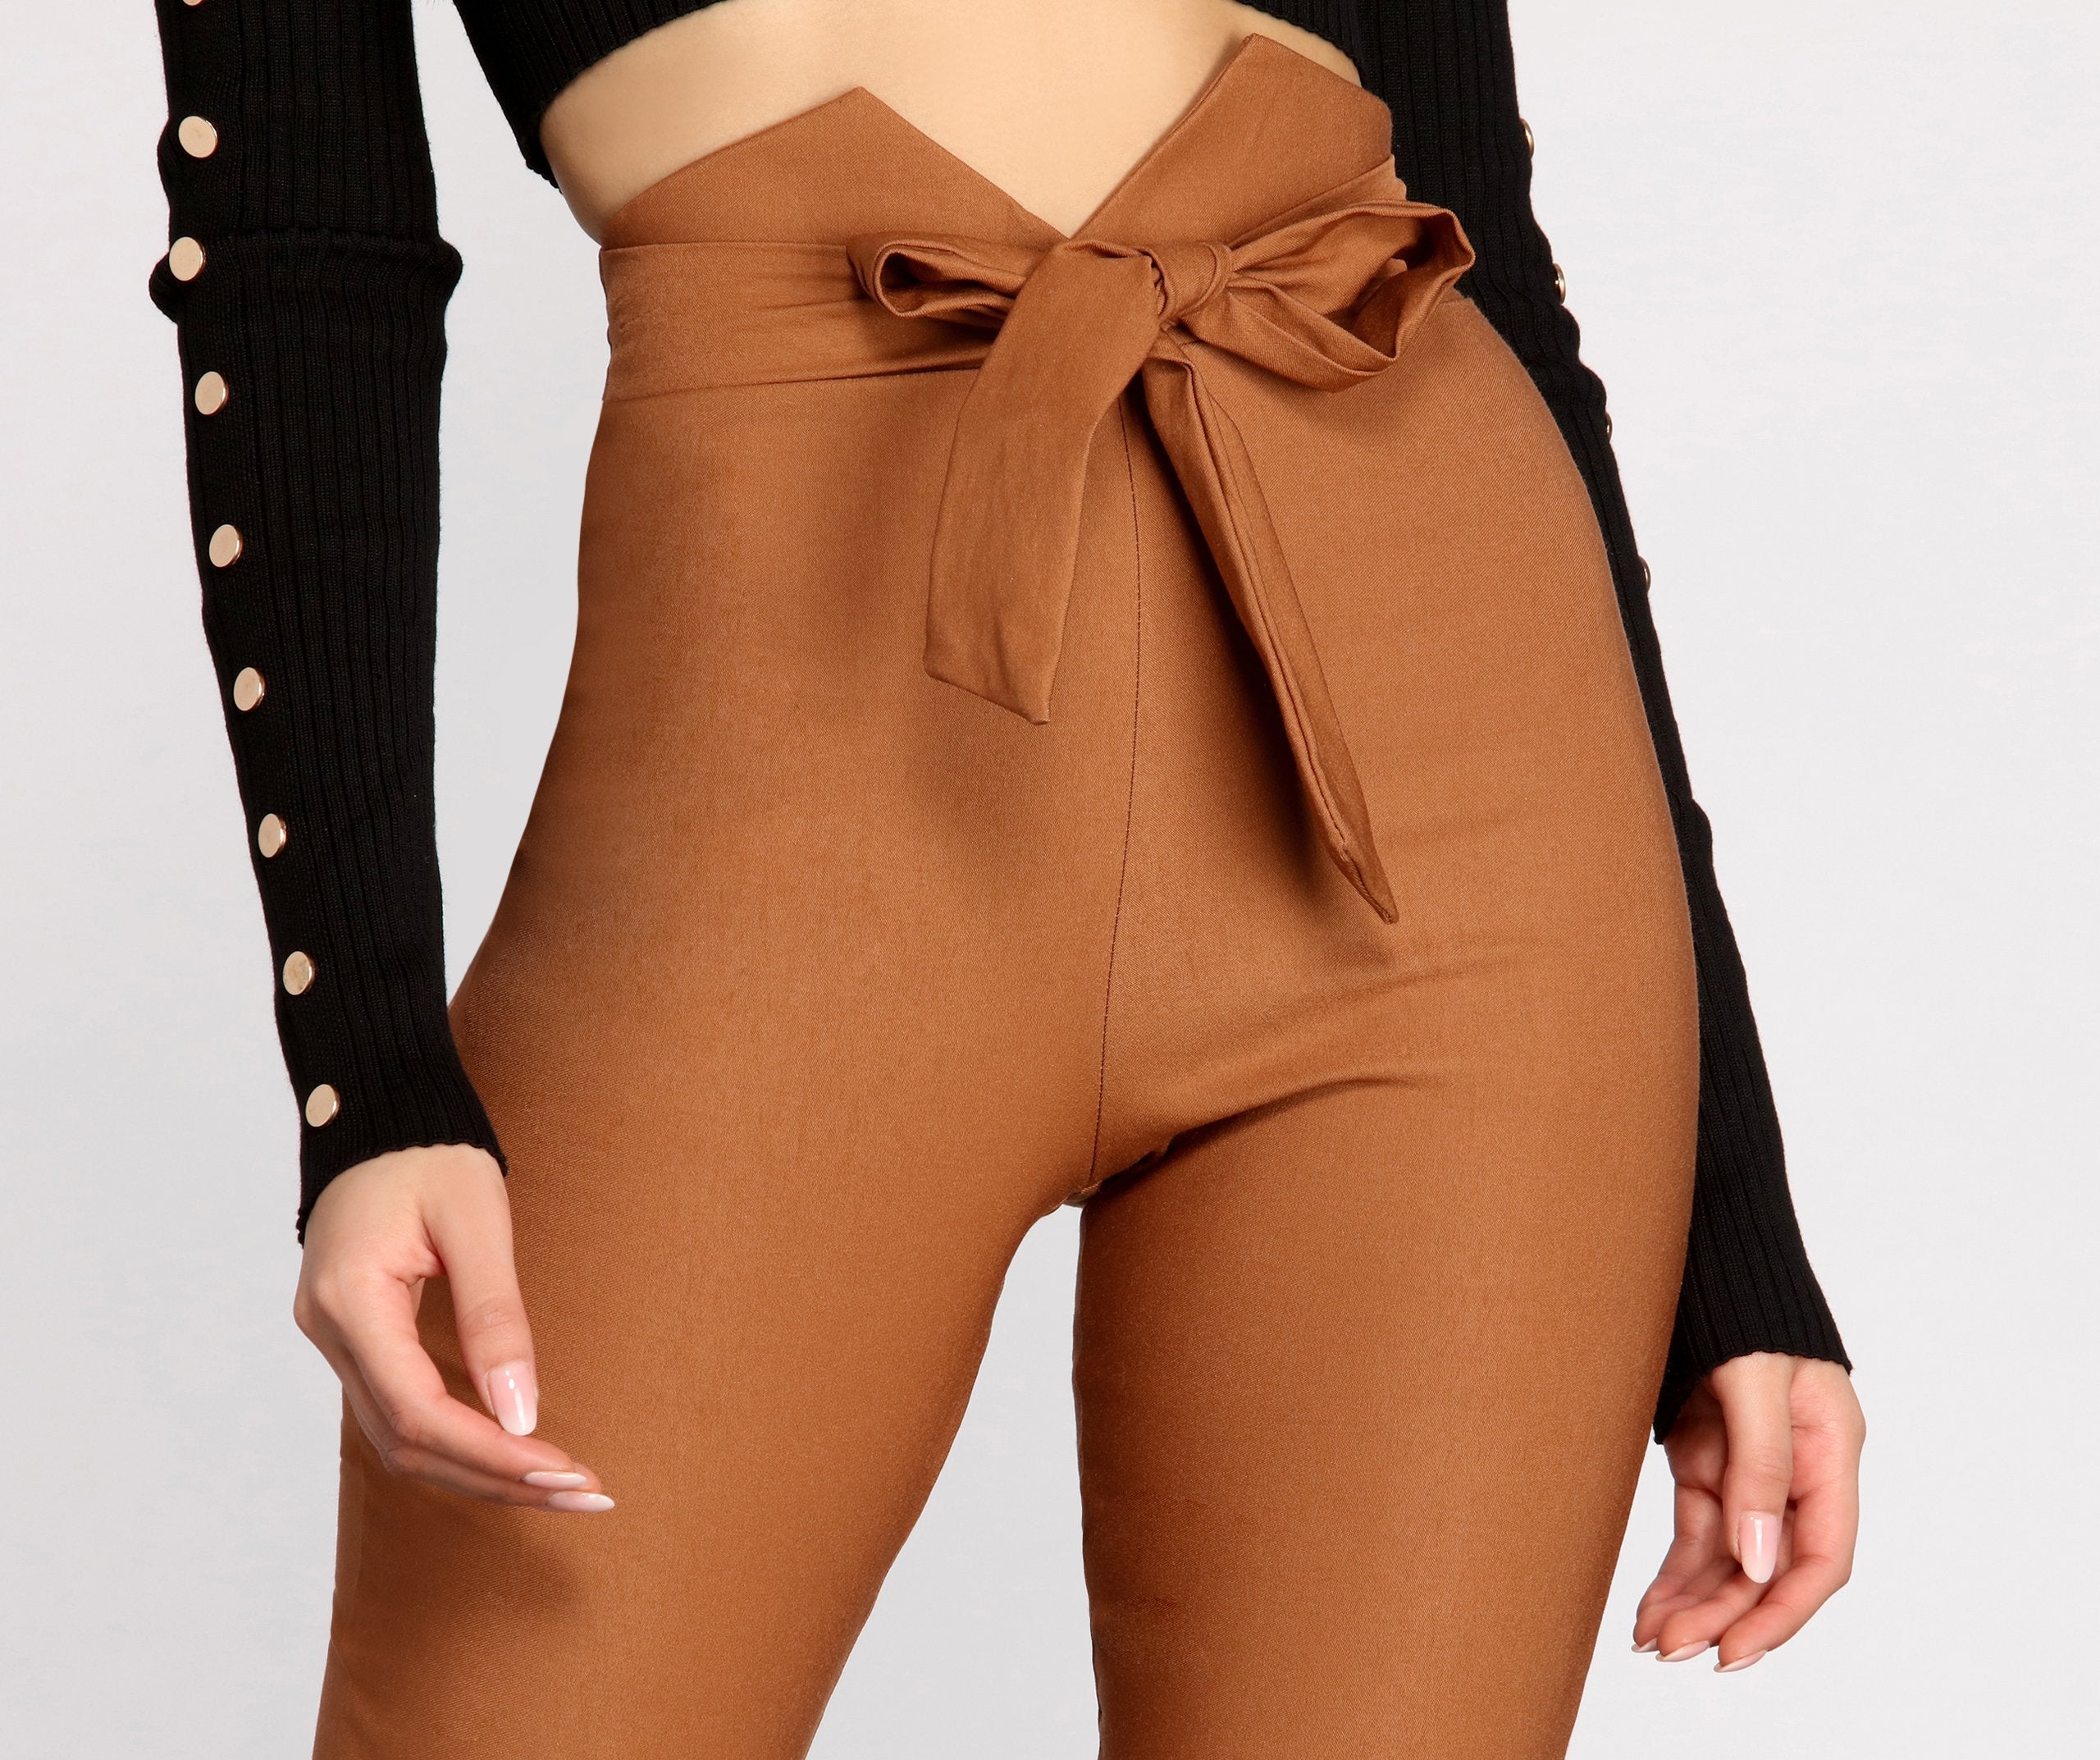 High Waist Tie Front Skinny Pants - Lady Occasions